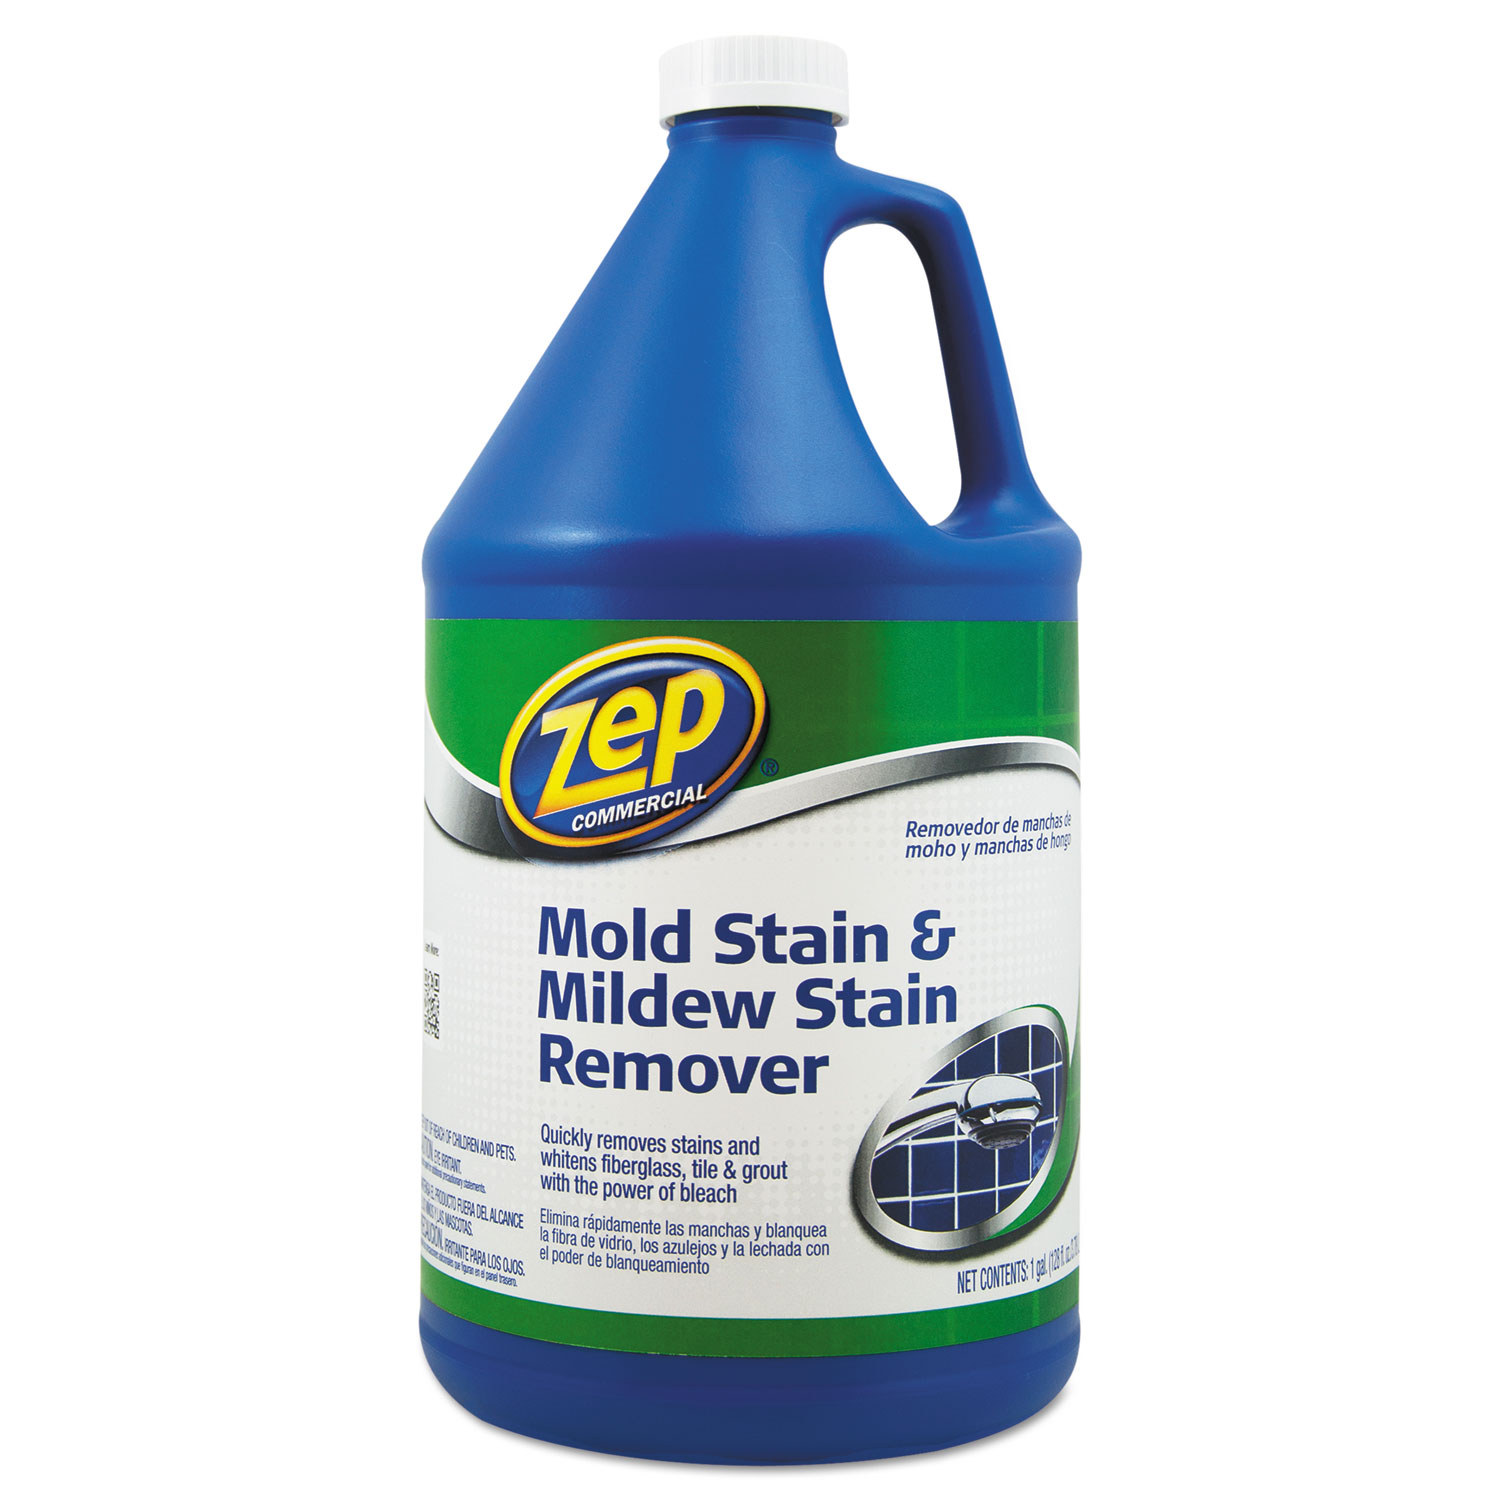  Zep Commercial ZUMILDEW128 Mold Stain and Mildew Stain Remover, 1 gal Bottle (ZPEZUMILDEW128E) 